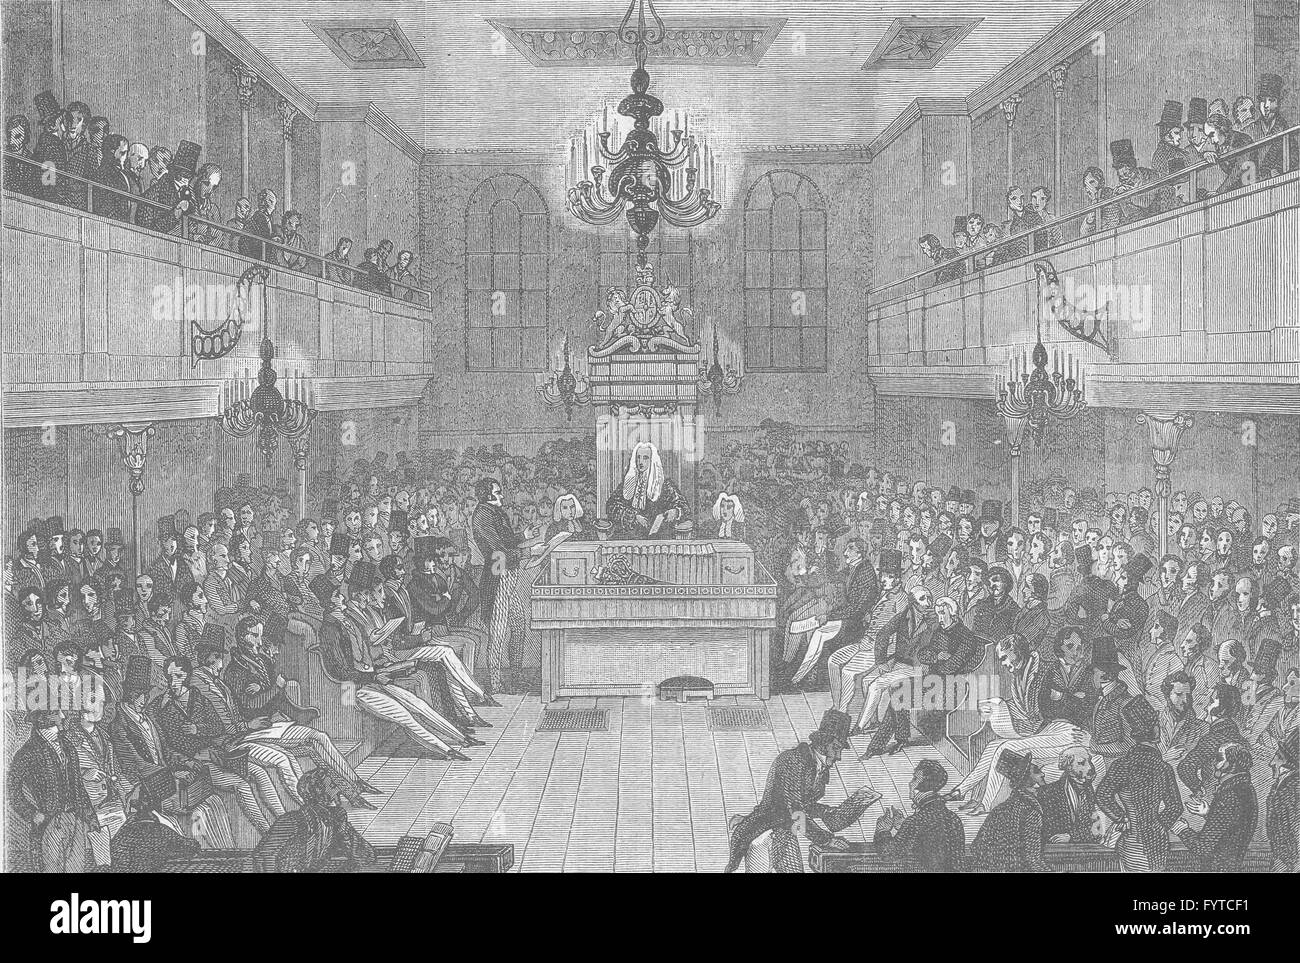 THE ROYAL PALACE OF WESTMINSTER: Interior of the House of Commons, 1834, c1880 Stock Photo